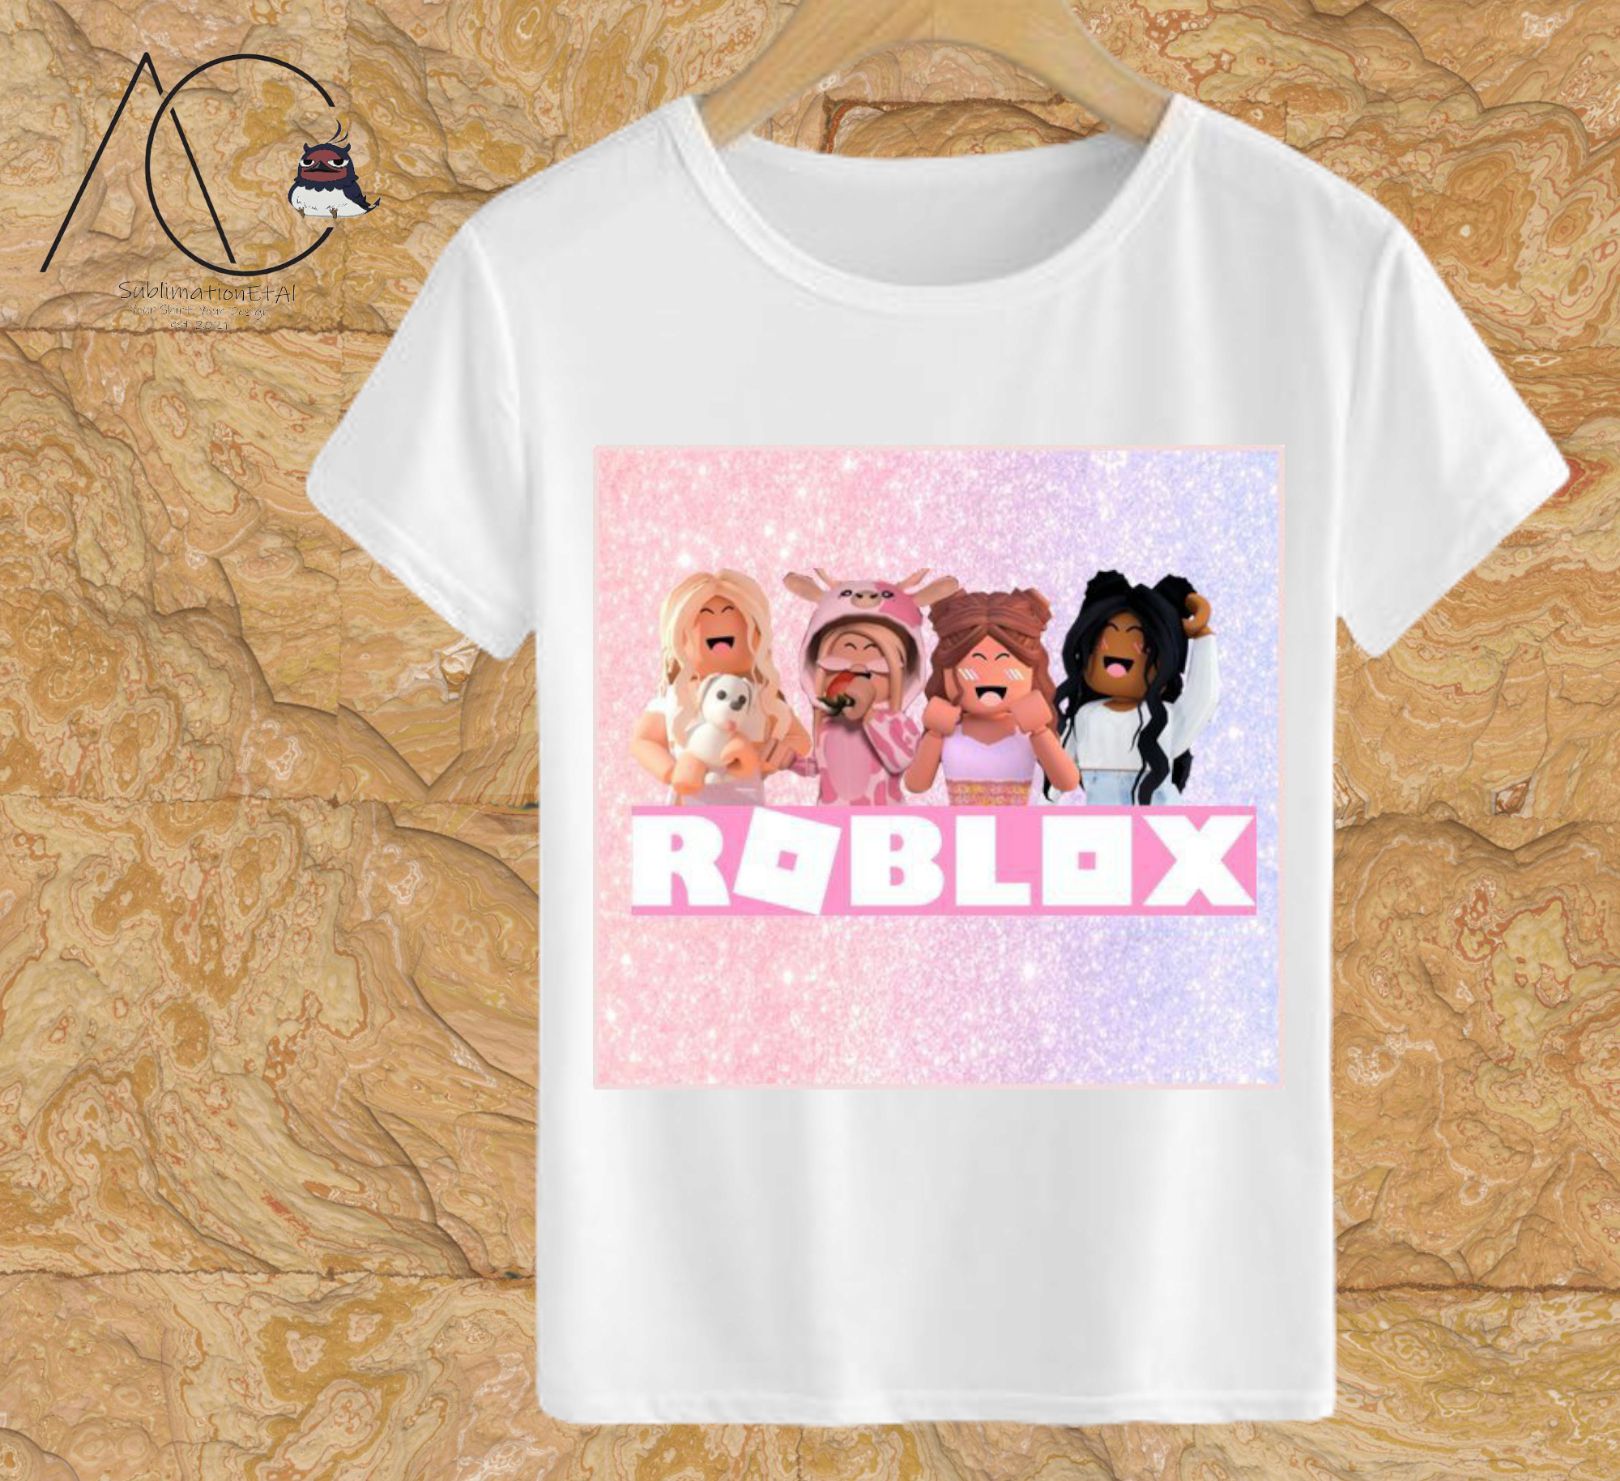 ROBLOX Black Tees [BATCH 1] for Kids and Adults